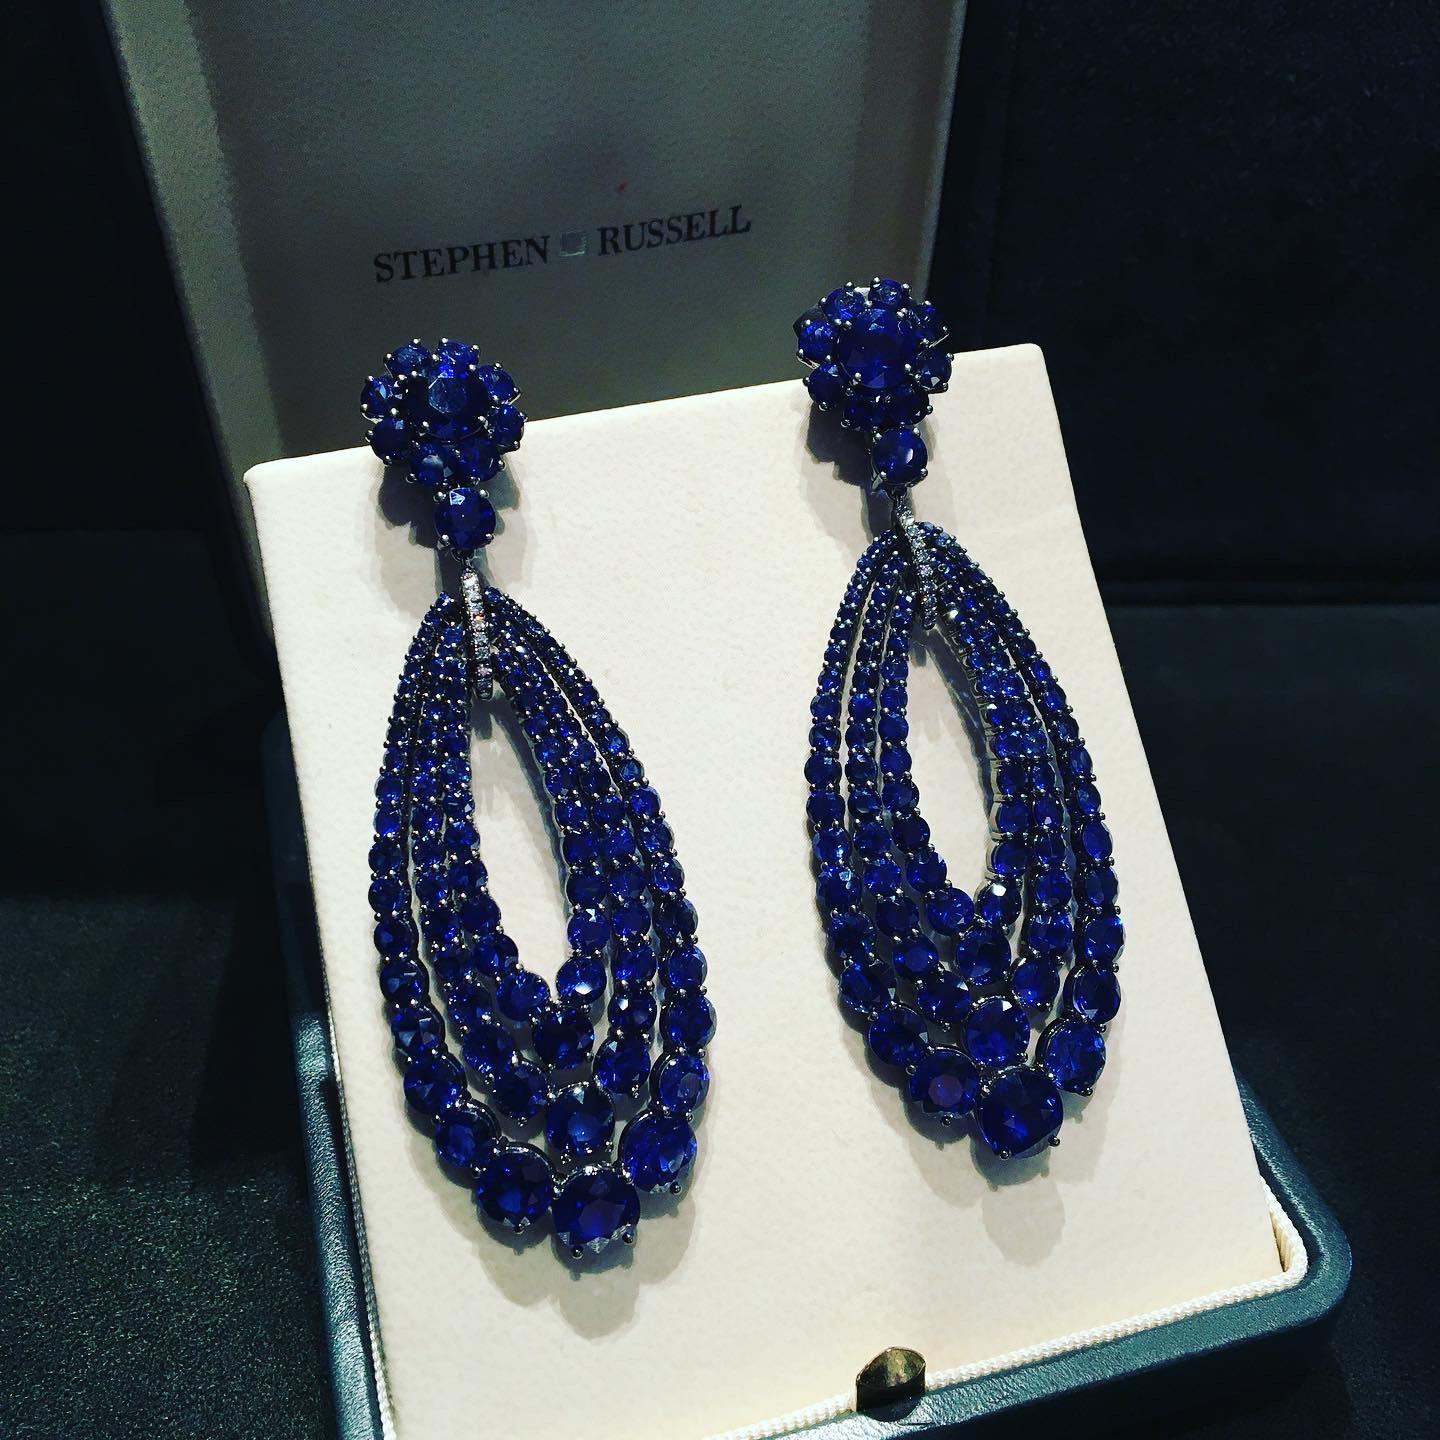 Stephen Russell 18K Blackened Gold & Sapphire Earrings; Set with 210 Brilliant Cut Sapphires 34.38ct total weight.